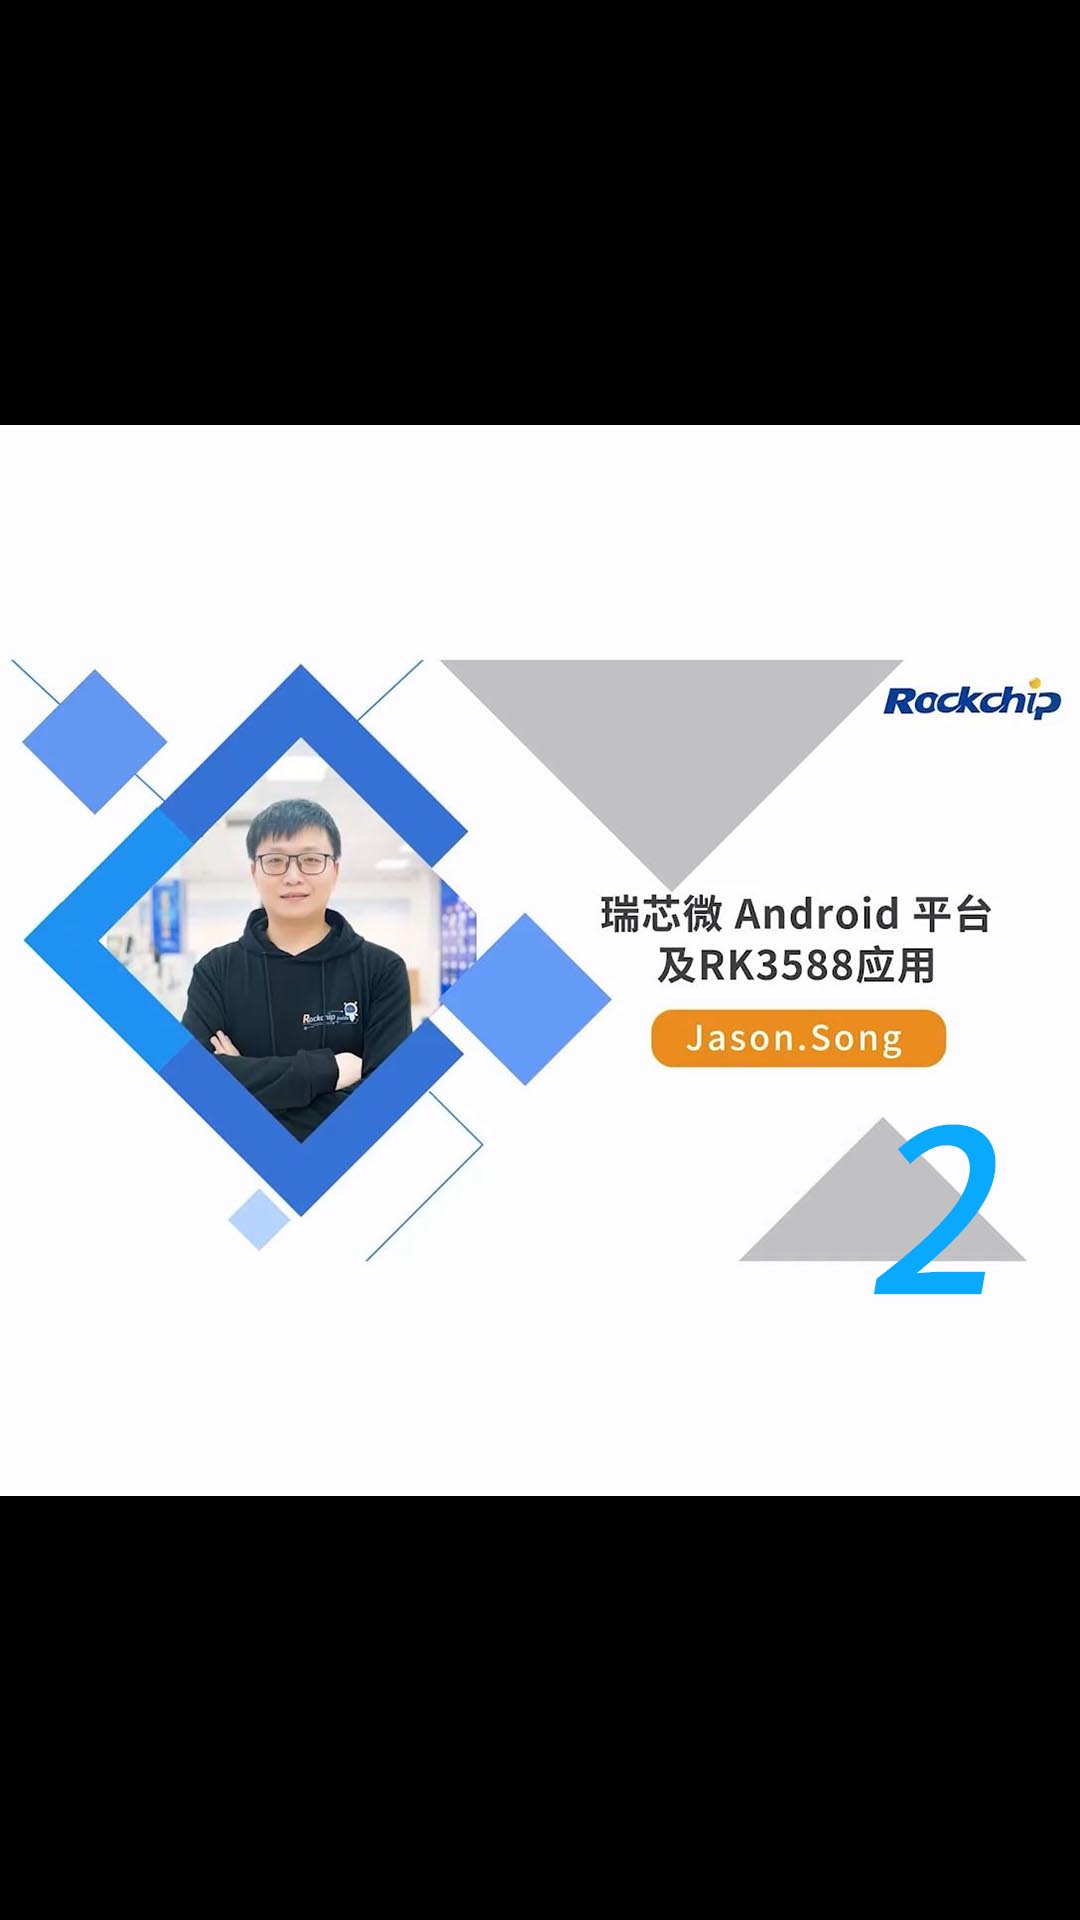 【RK公开课】Android 平台及RK3588应用 - RKDC2021-2